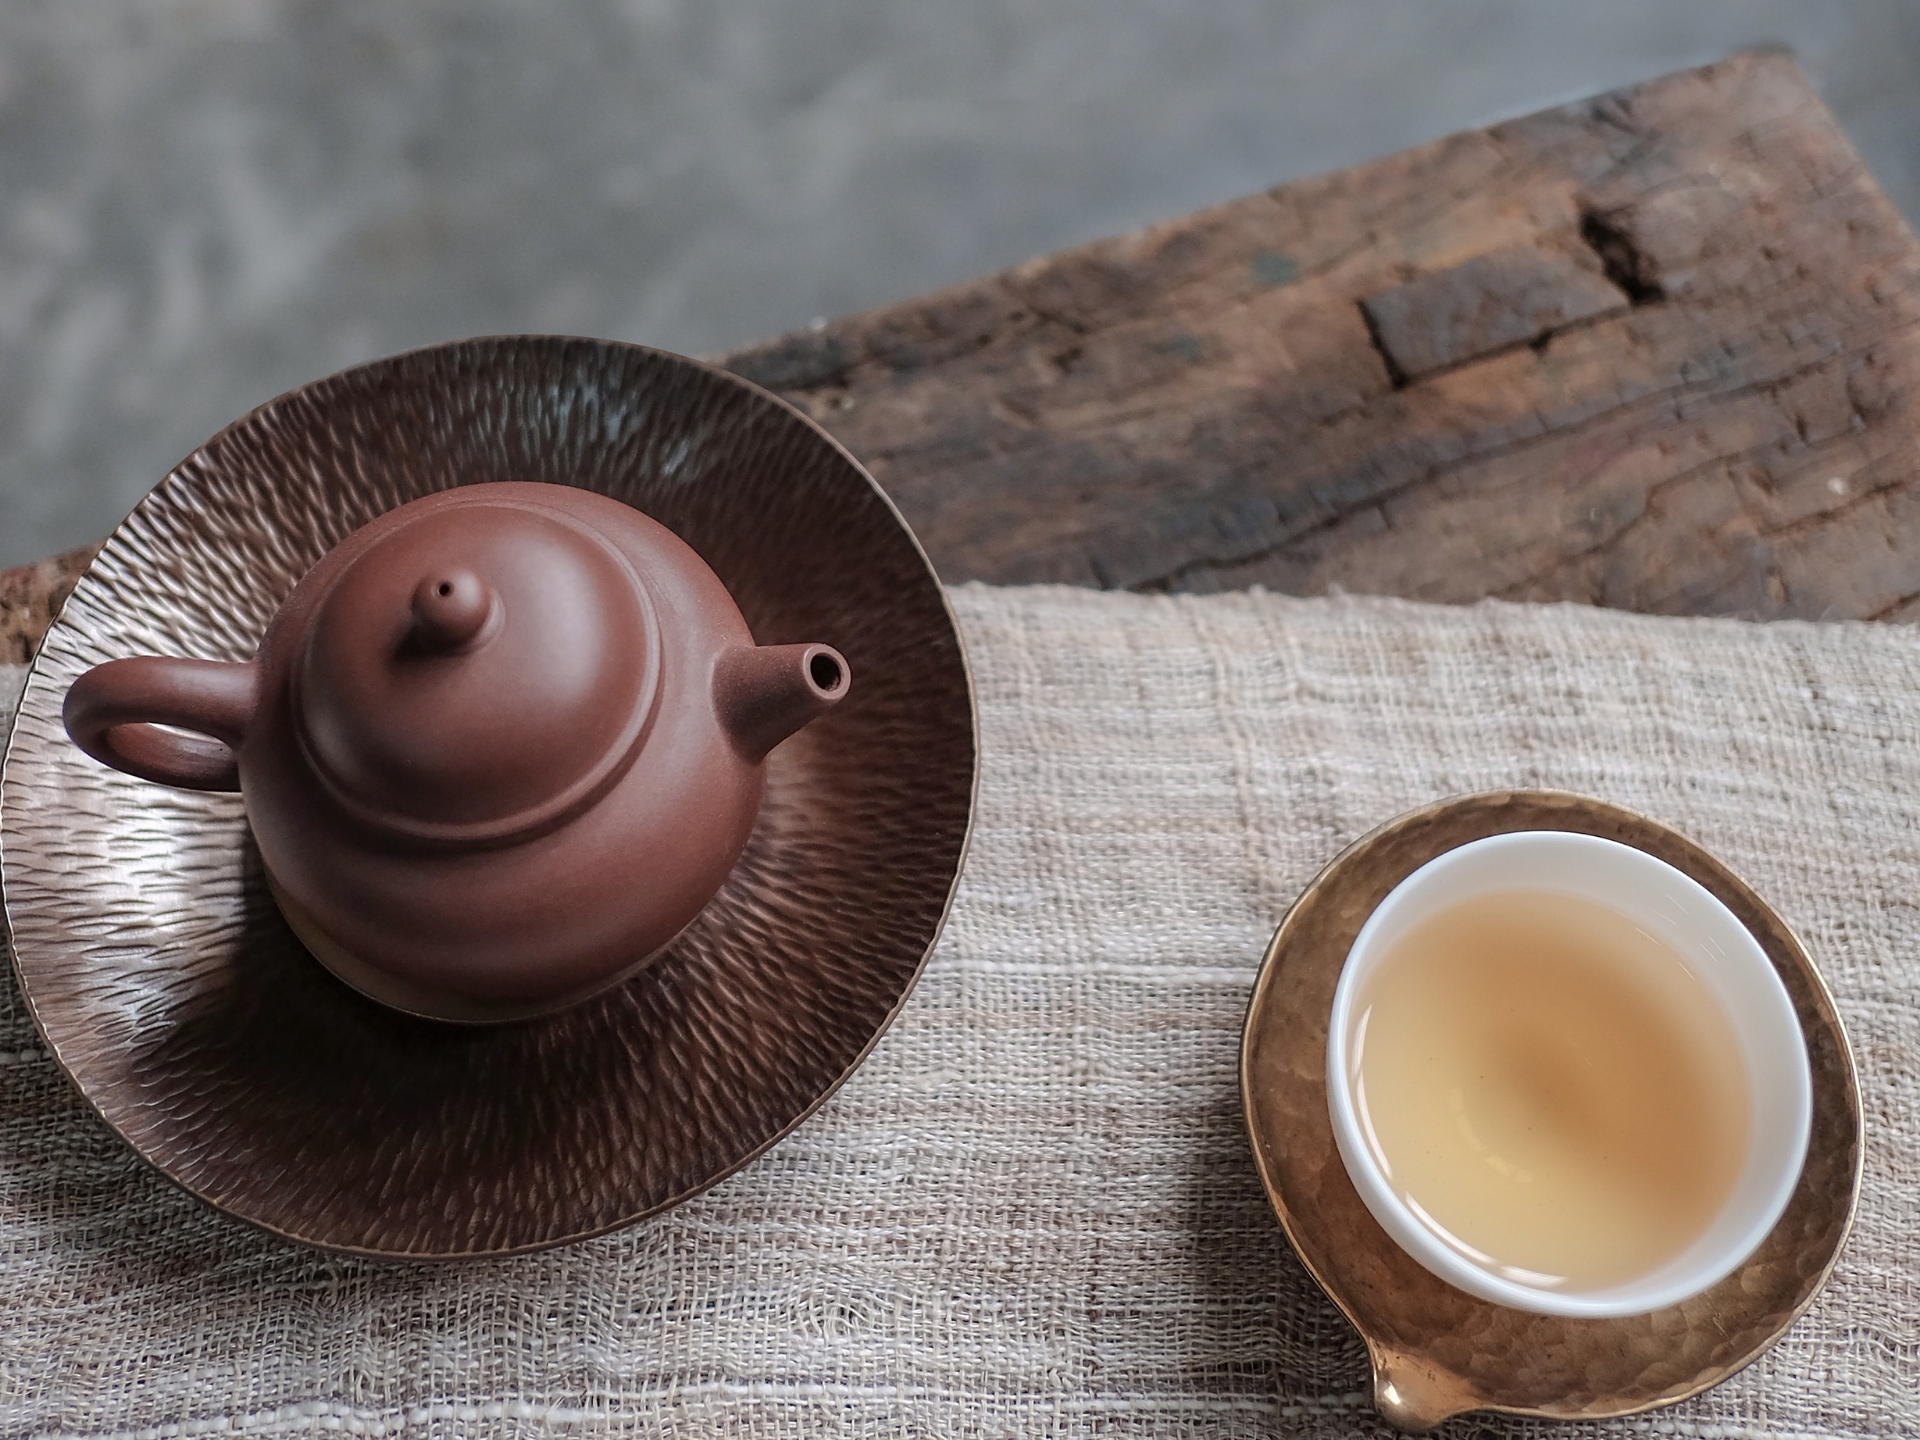 Two ways to steep tea: Gong Fu Cha and Western steeping